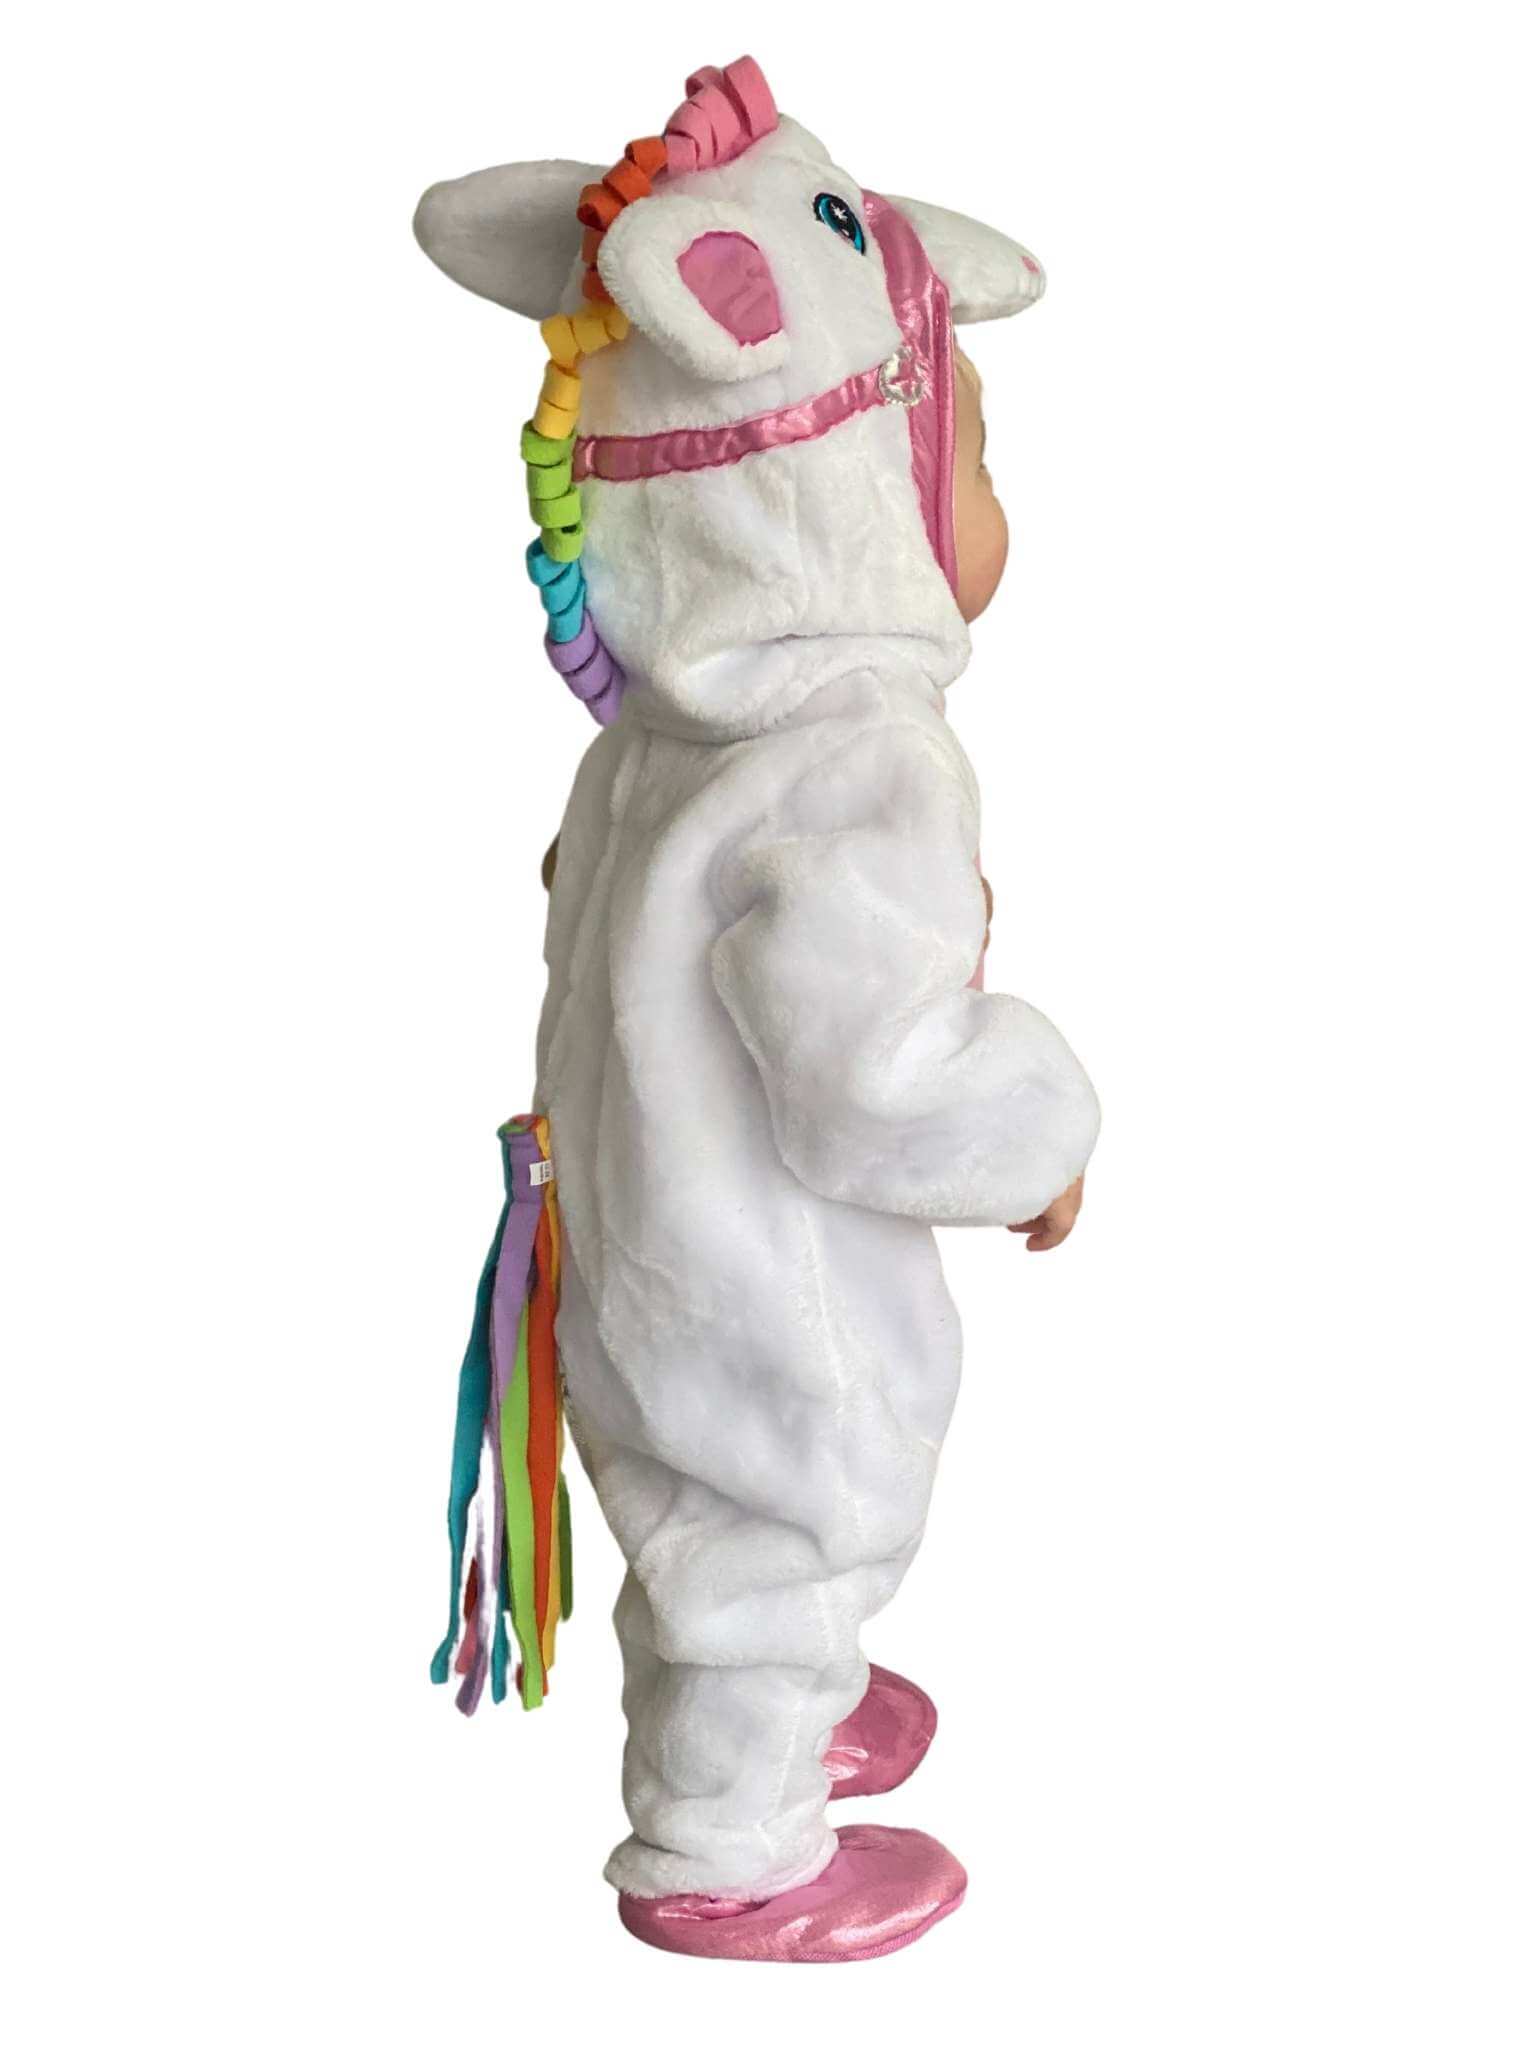 Side of the toddler wearing the unicorn costume.